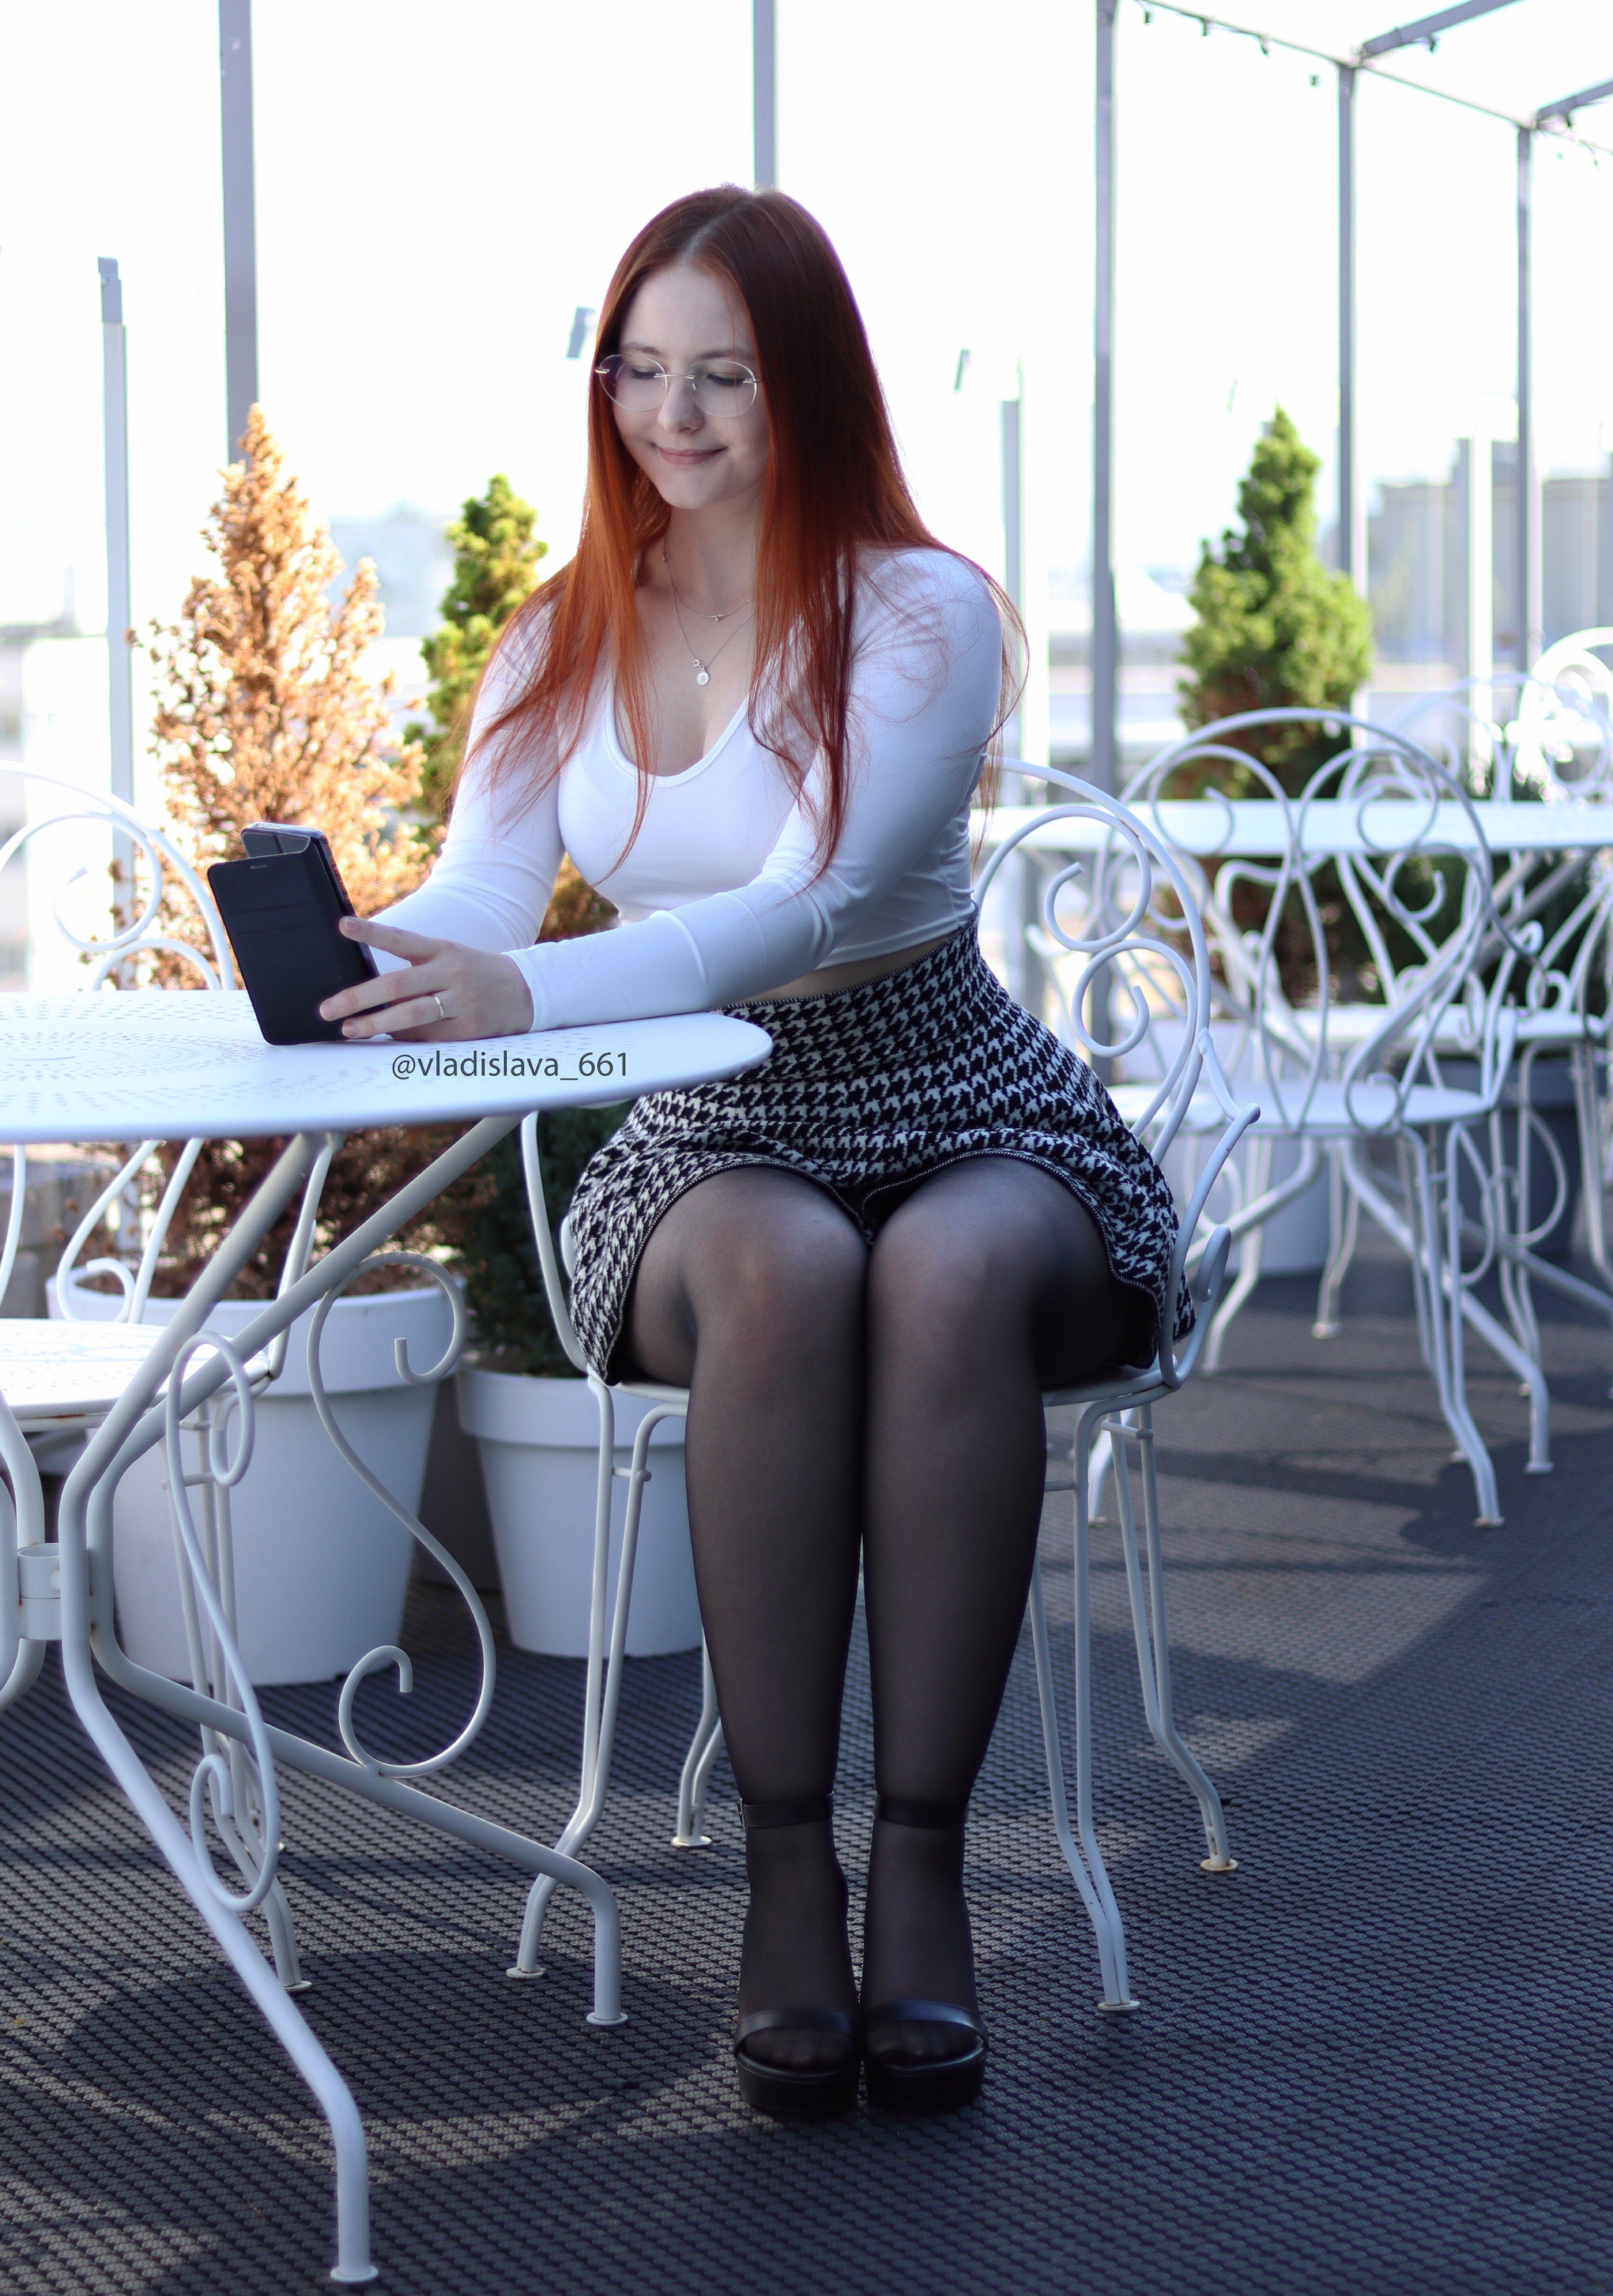 Women Model Redhead White Tops Sitting Outdoors Women Outdoors Tights 2107x3000